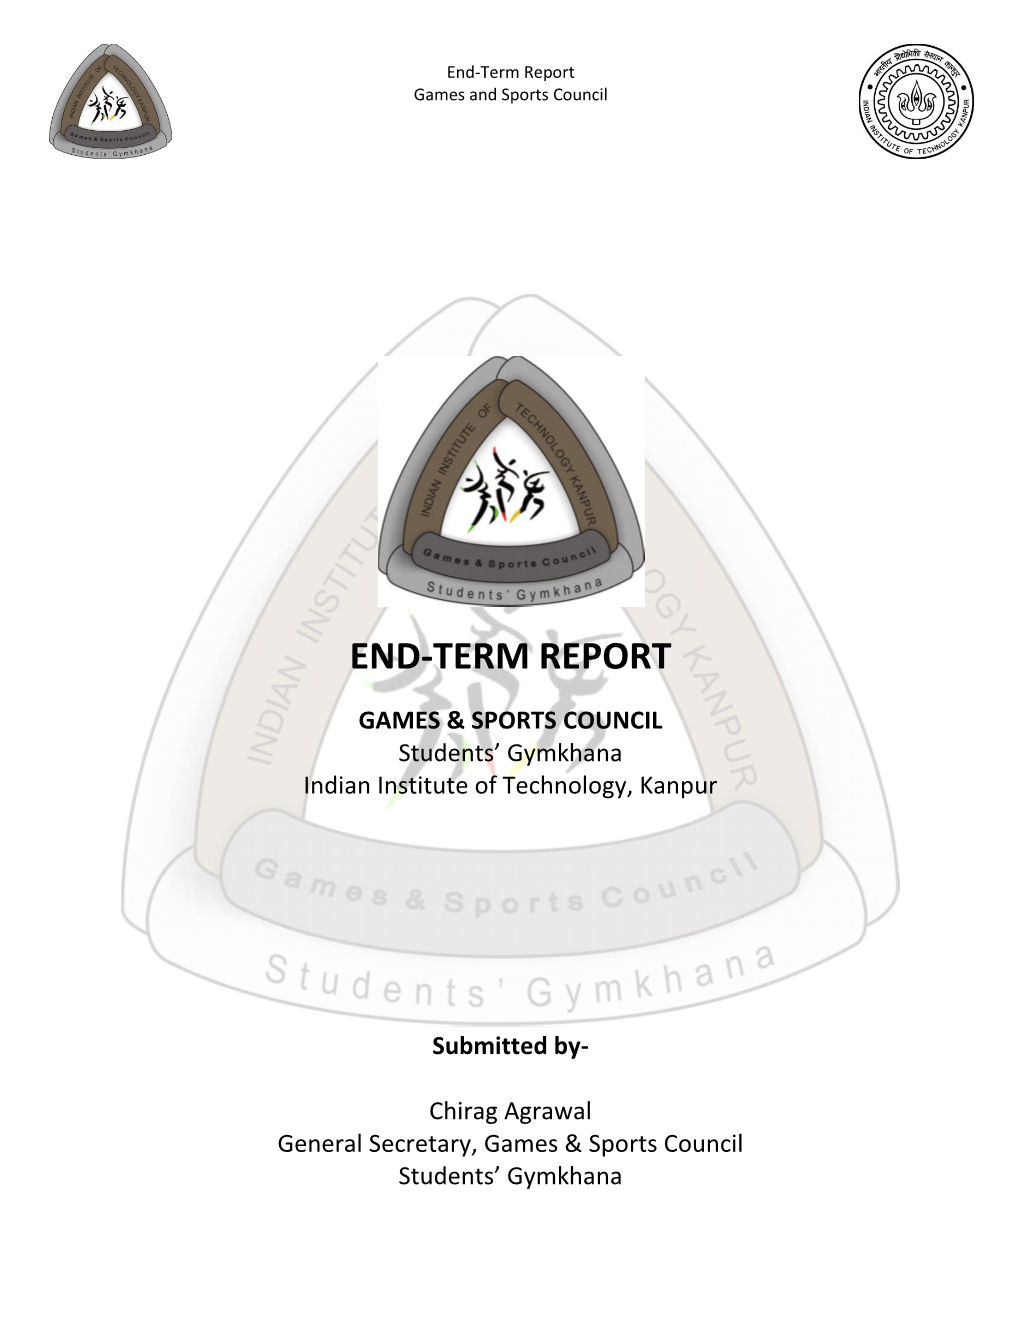 End-Term Report Games and Sports Council